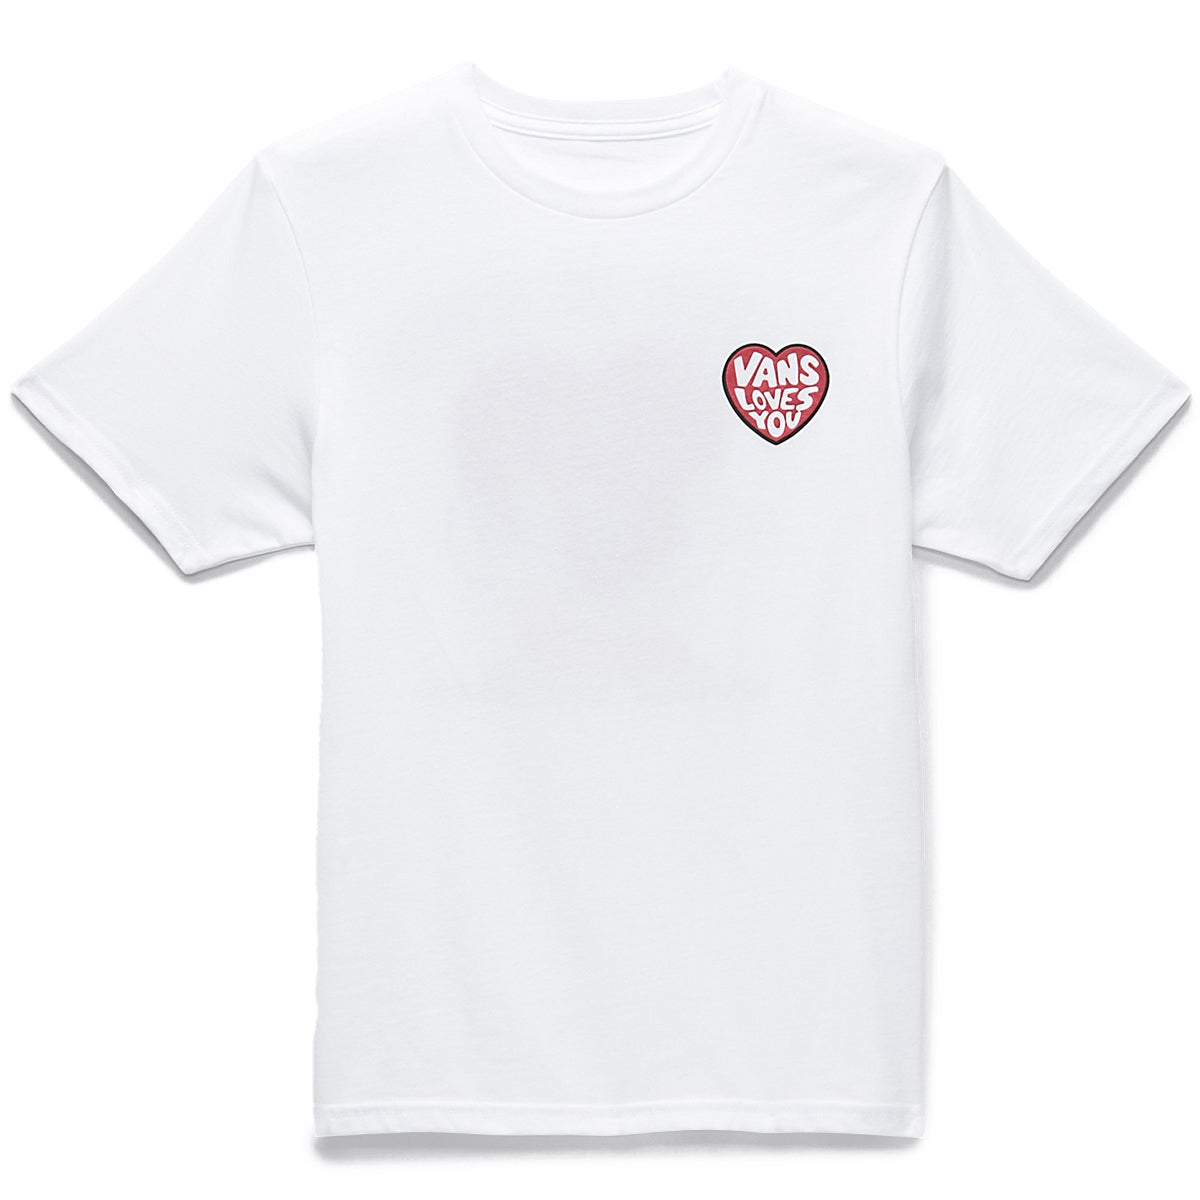 Vans Handle With Care Youth Tee